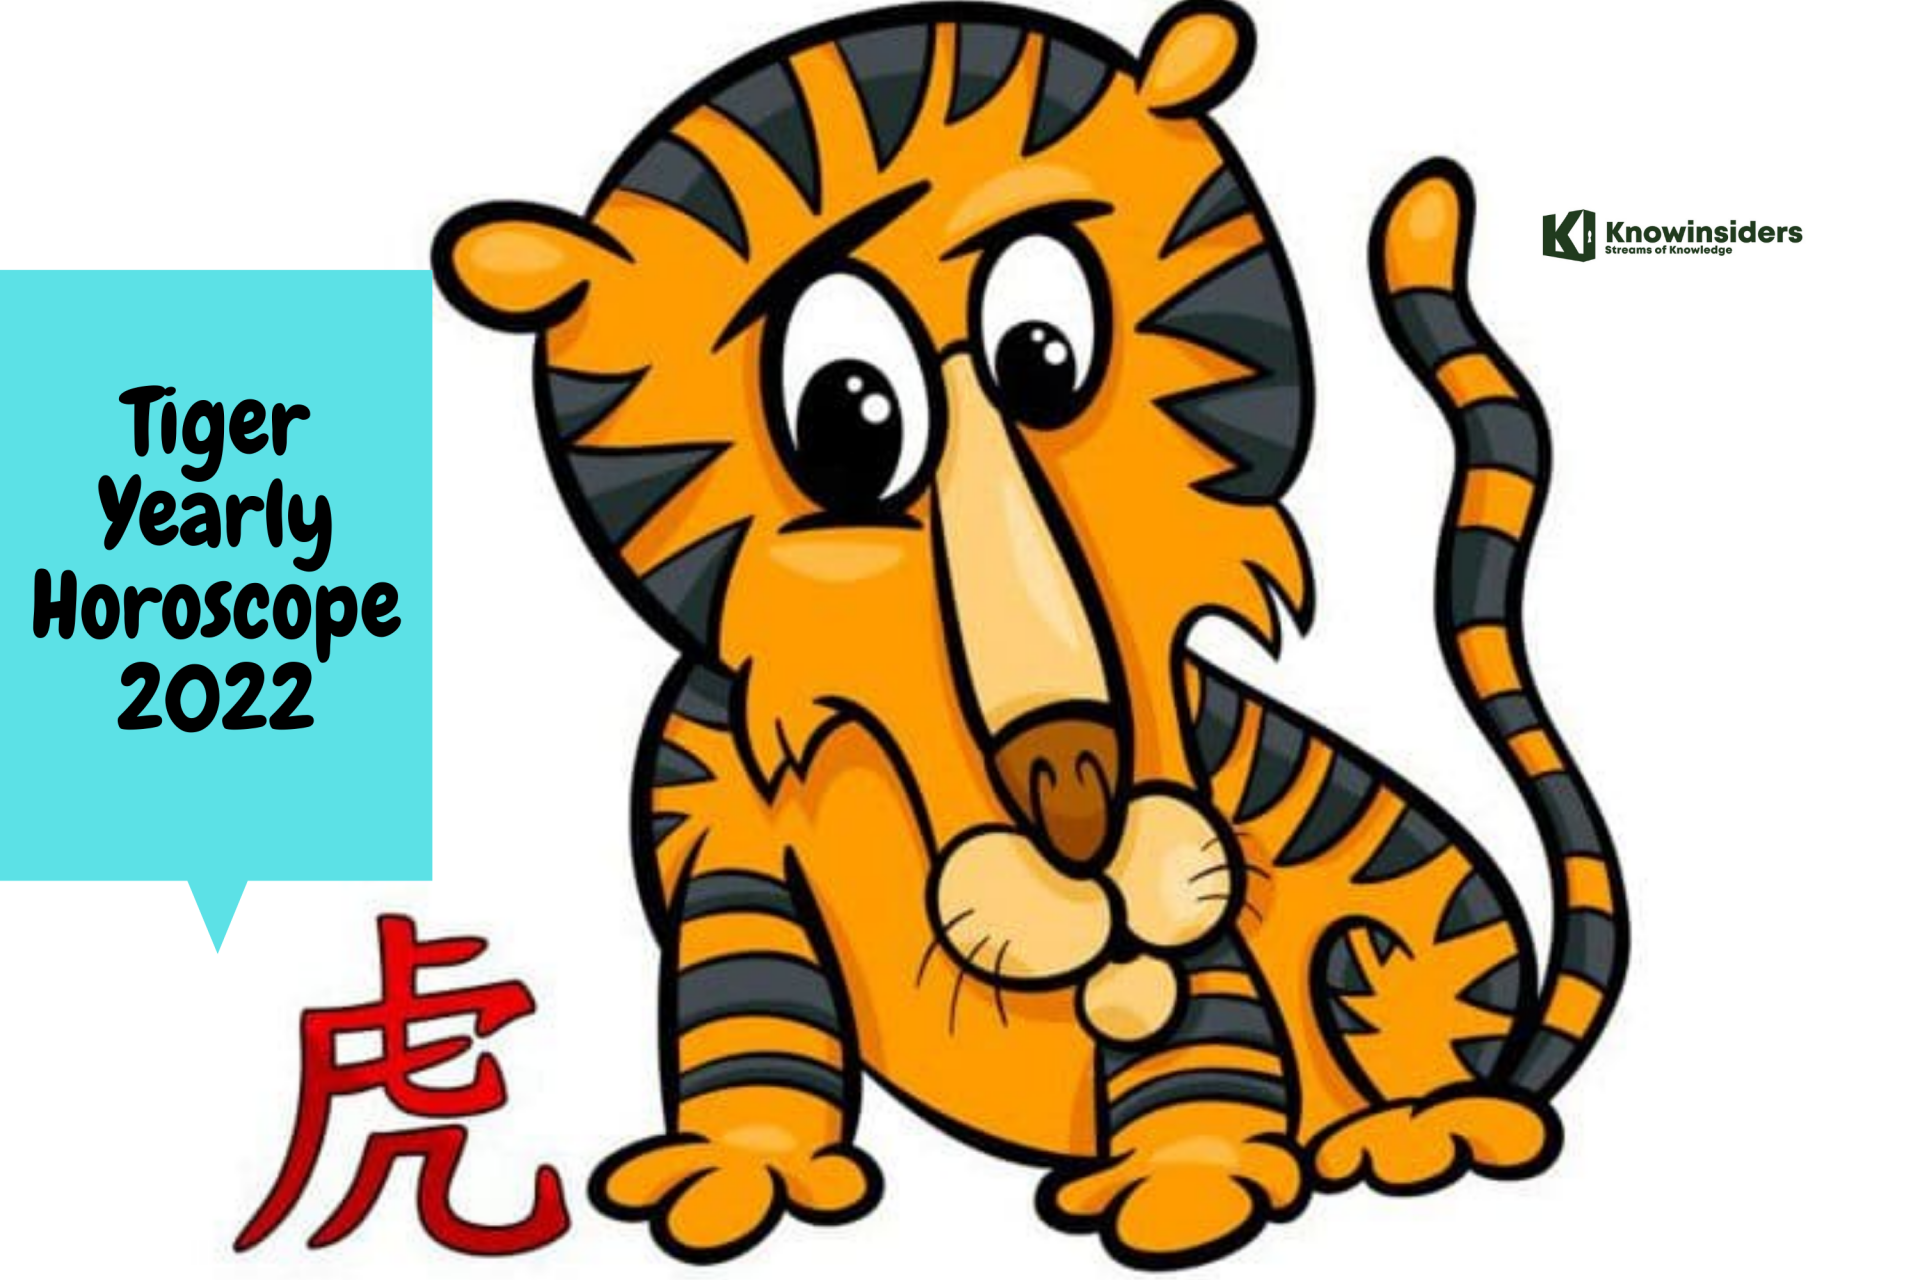 Tiger Yearly Horoscope 2022 – Feng Shui Prediction for Love, Money, Career and Health